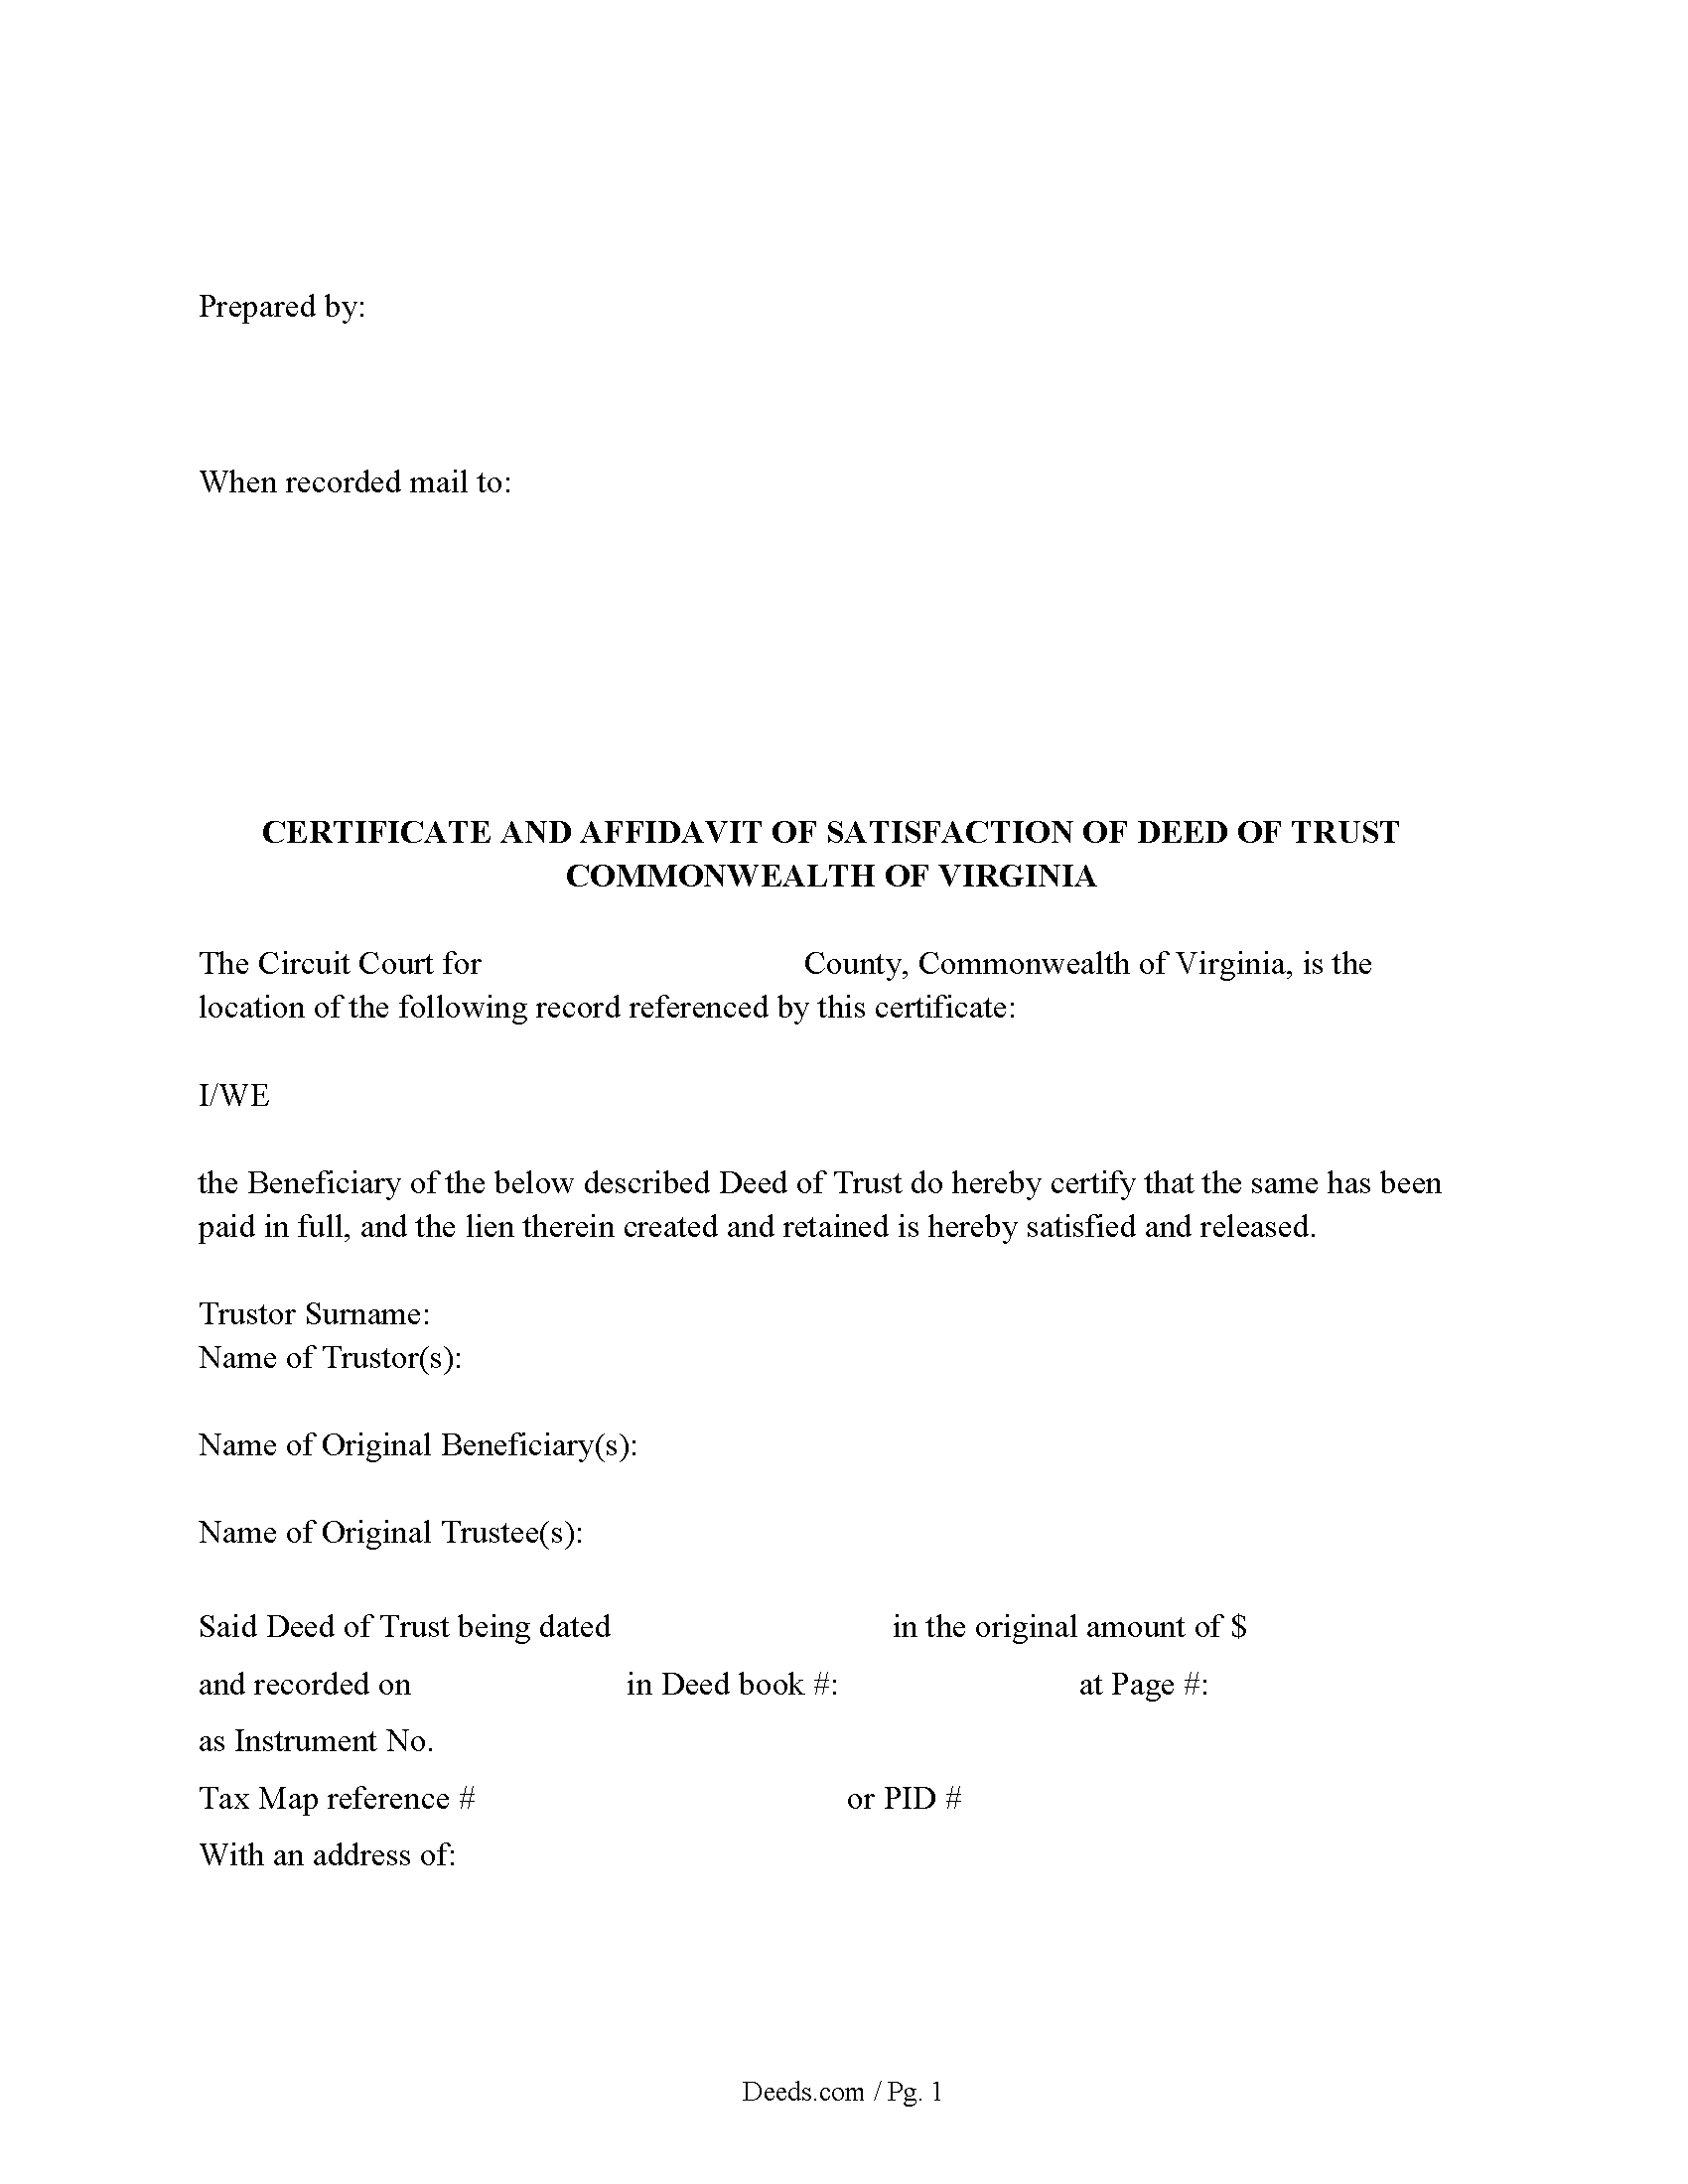 Certificate and Affidavit of Satisfaction of Deed of Trust